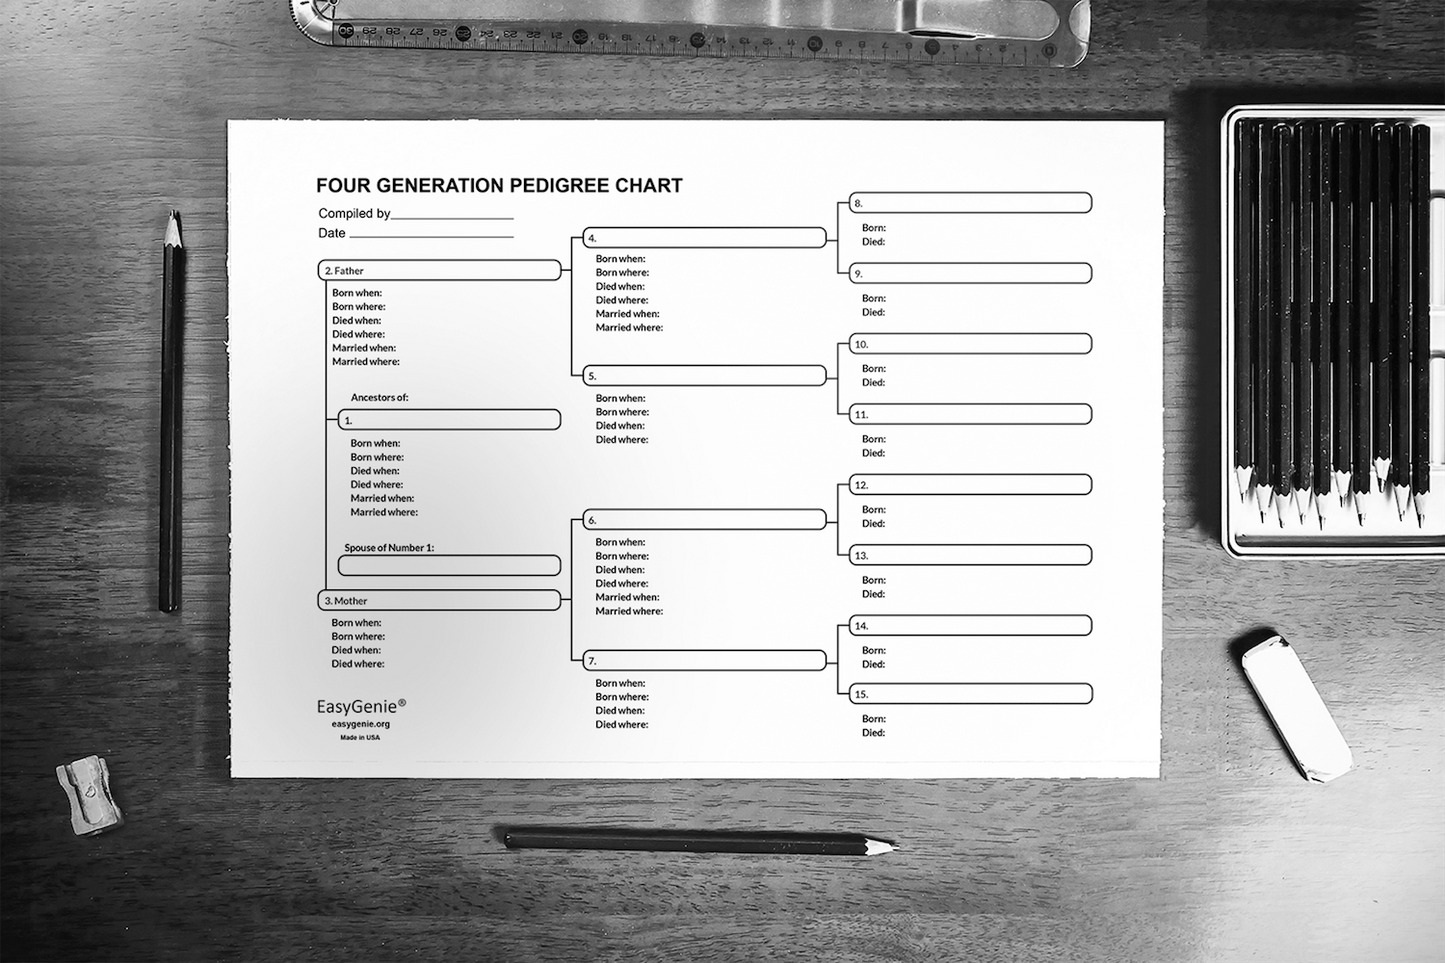 Large-Print Genealogy Charts and Forms Kit (30 Sheets)